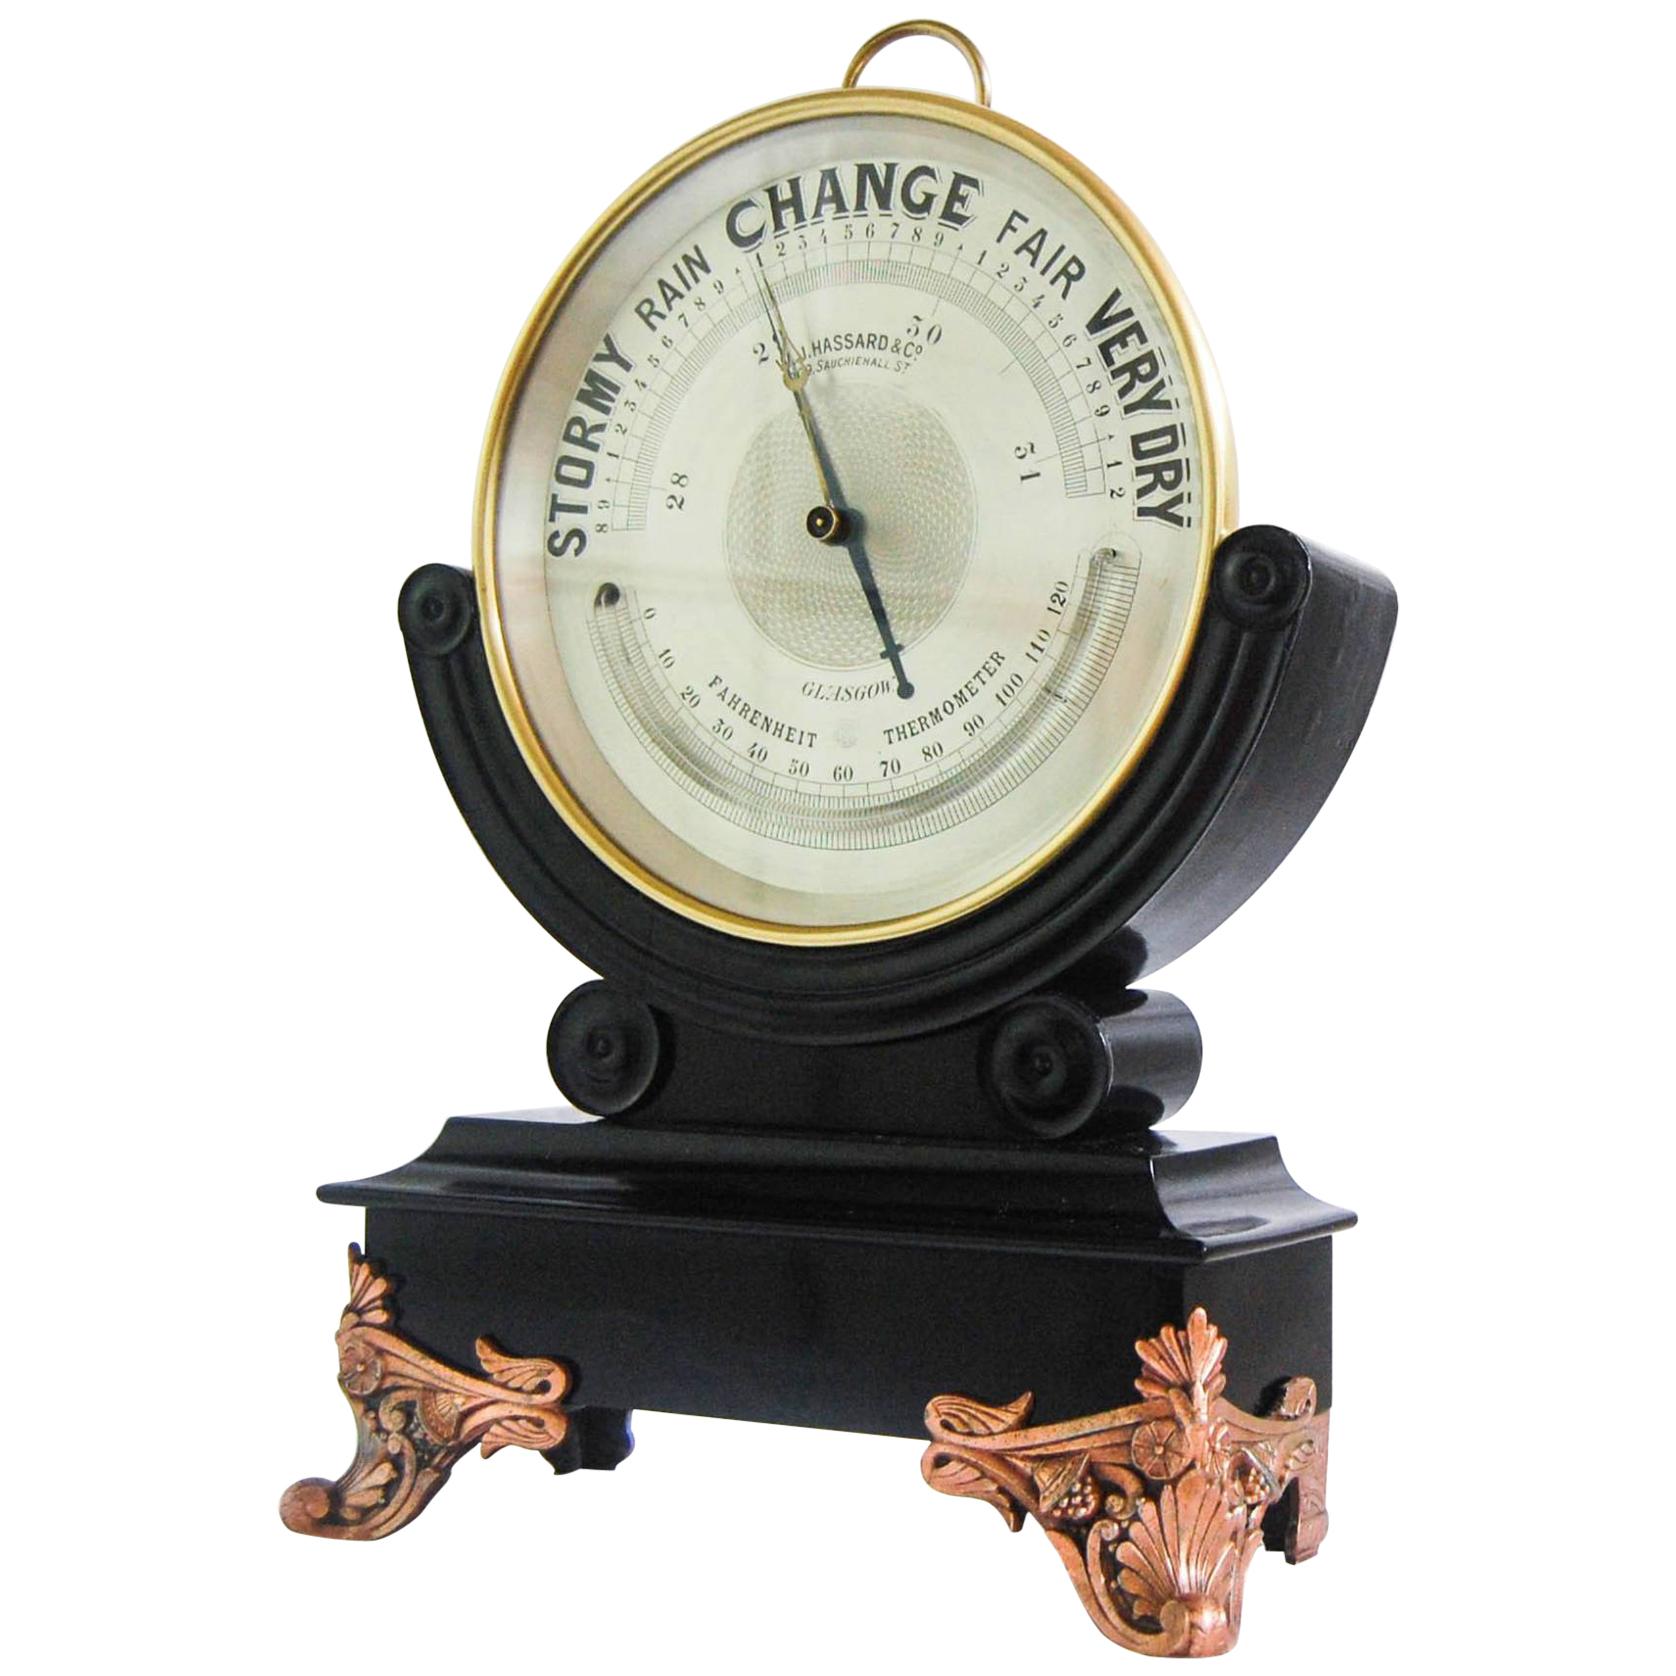 Huge Late Victorian Dial Brass Aneroid Barometer on Ebonized Stand by WJ Hass